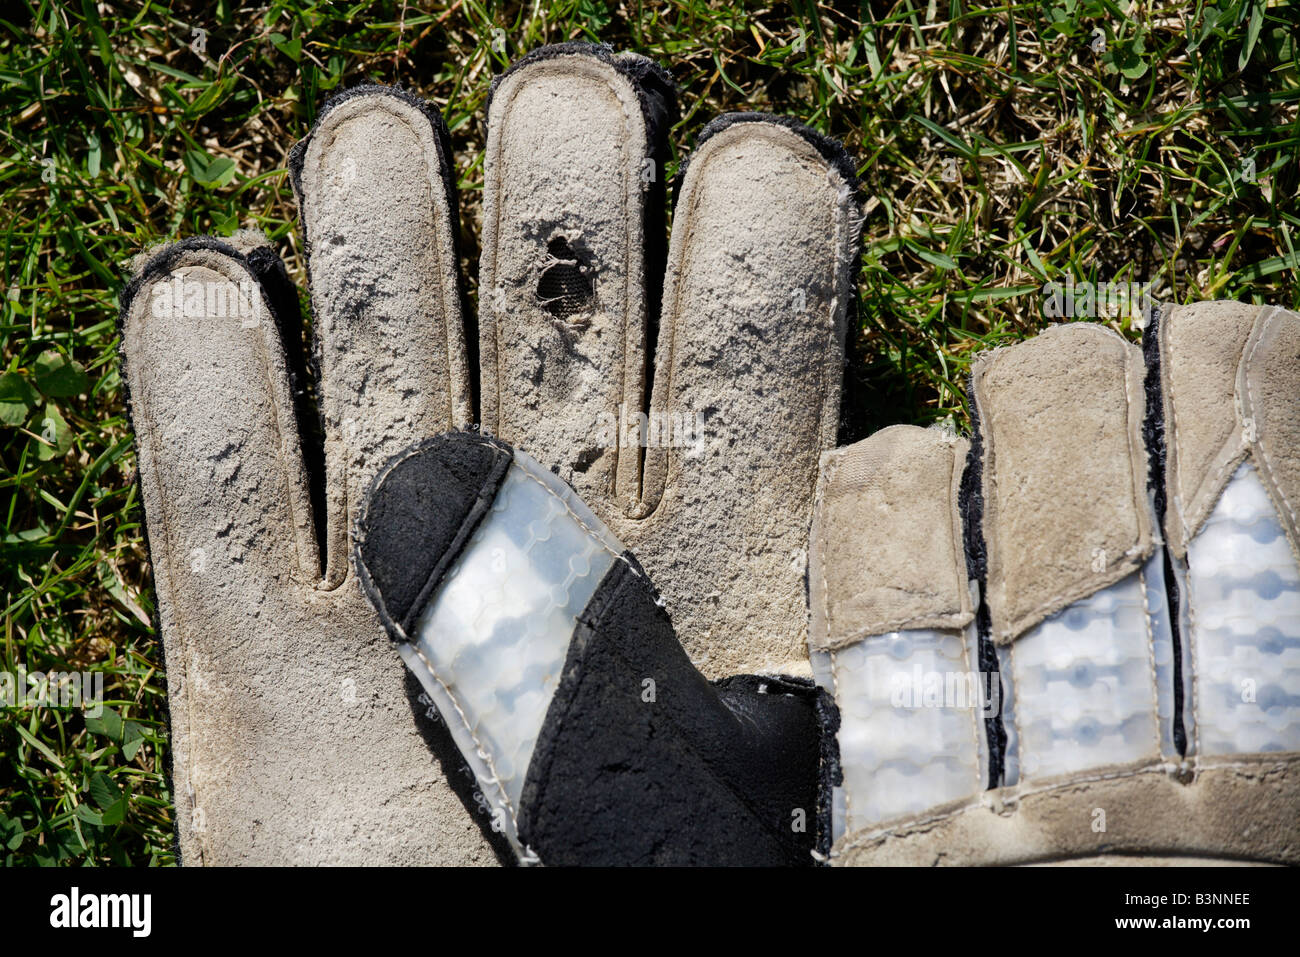 Gloves of a goalkeeper lying on grass Stock Photo